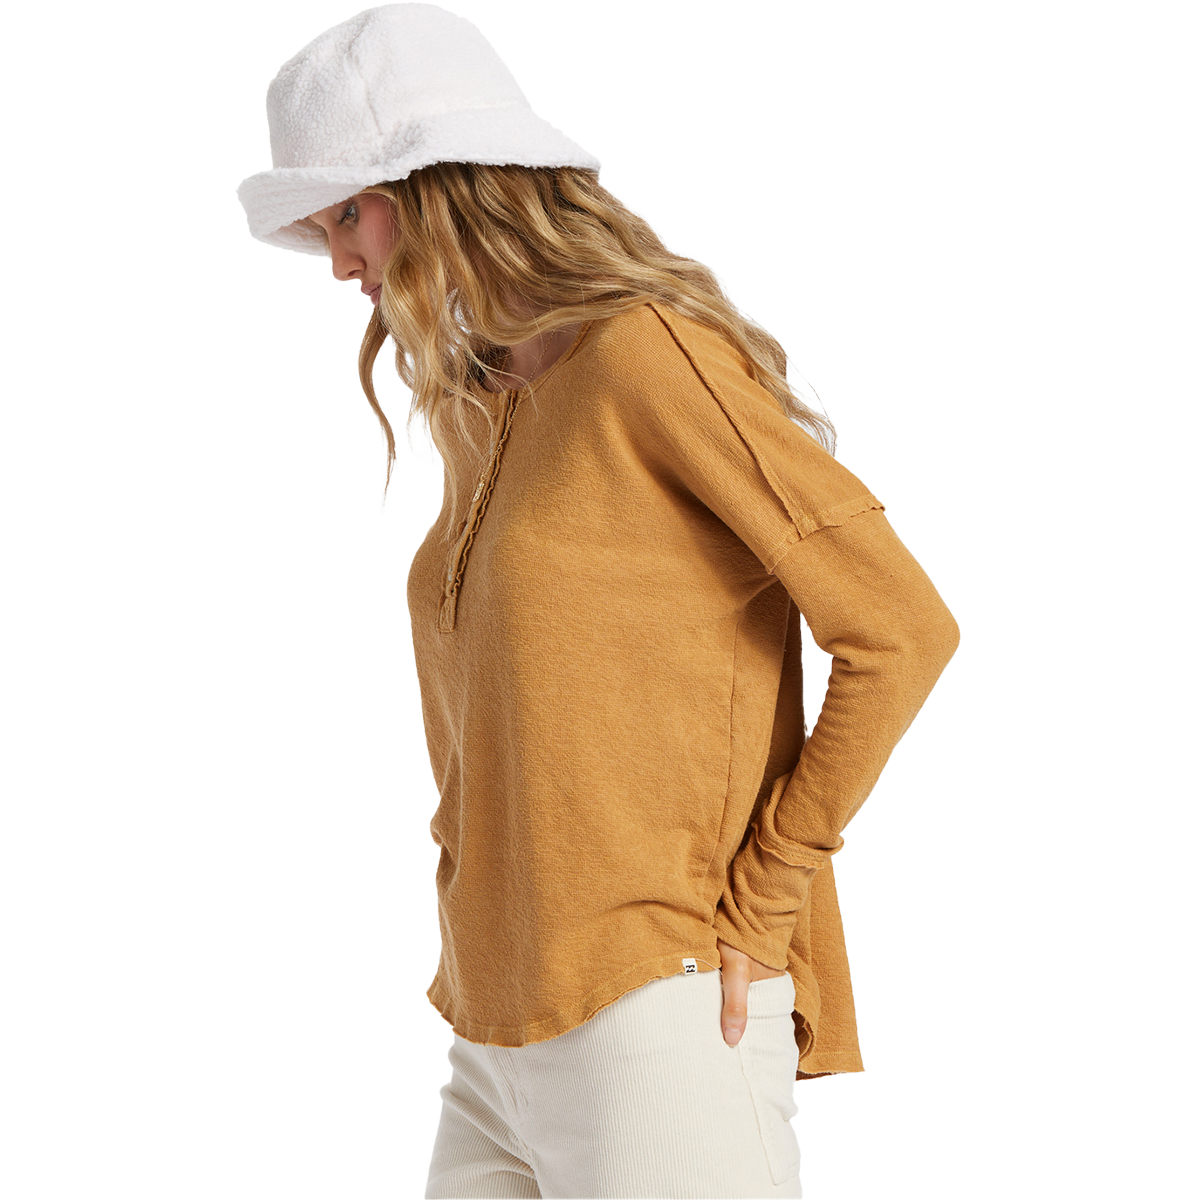 Women's New Anyday Henley Top alternate view